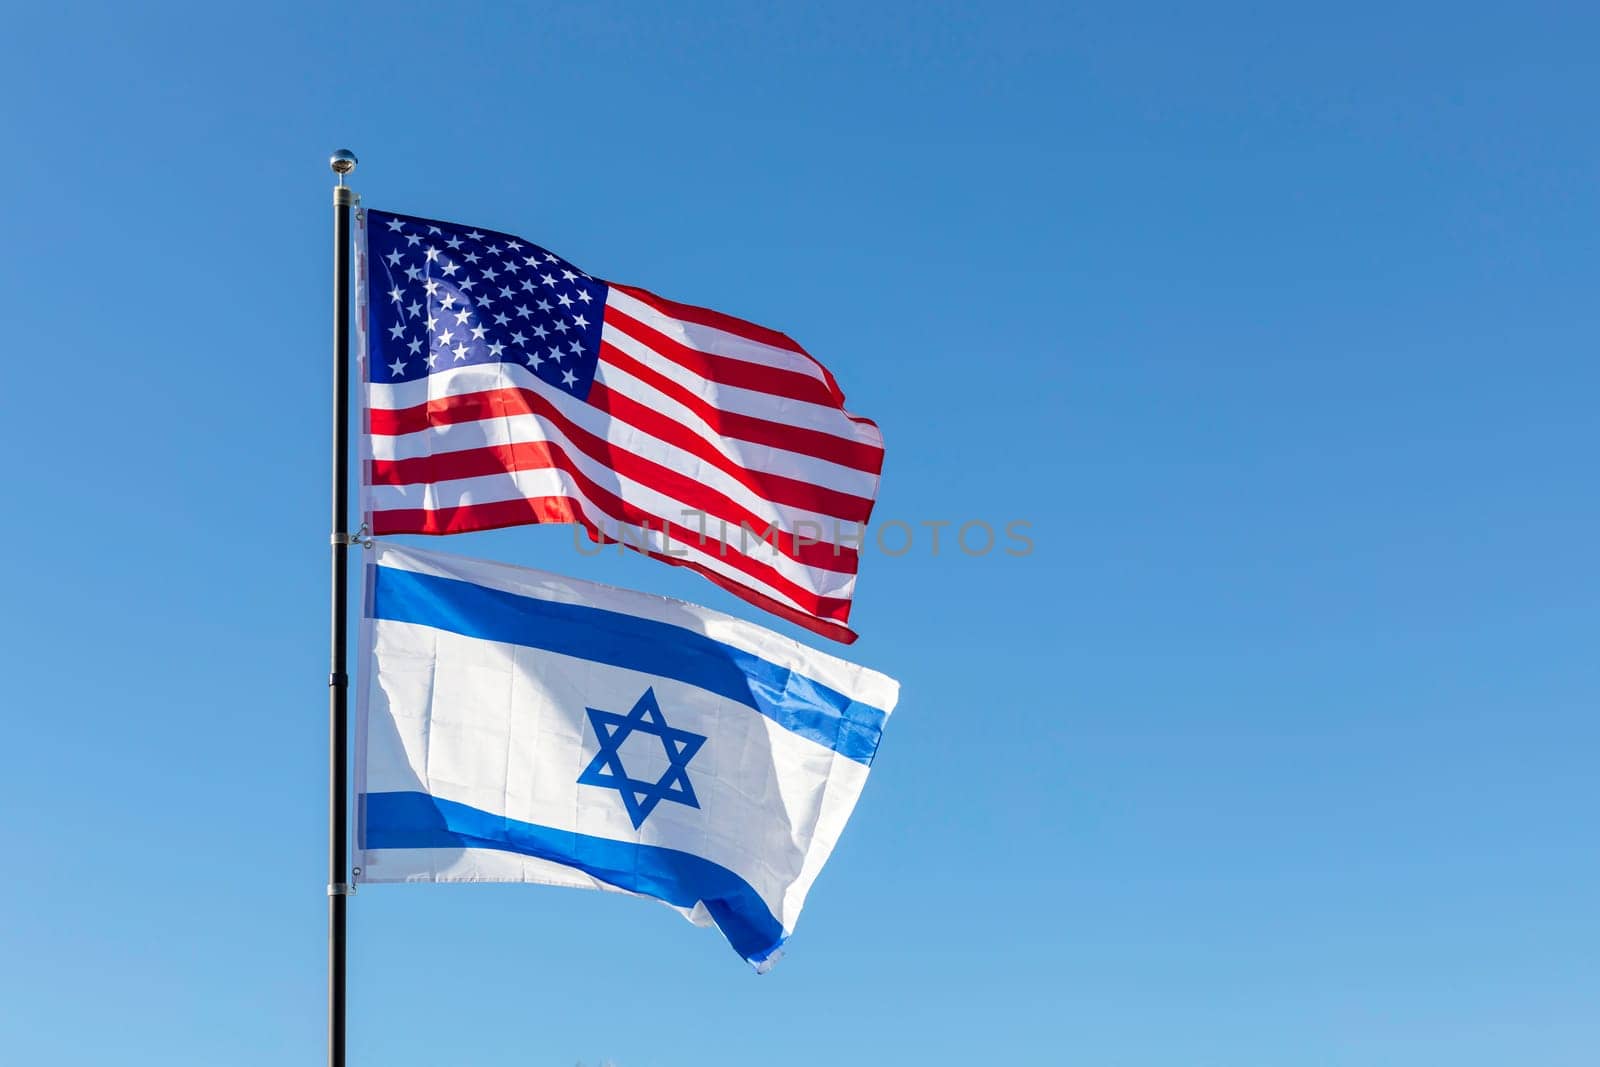 Waving Flags Of USA And Israel On The Same Flagpole On Background Of Blue Sky. Copy Space For Text. Design, Template Horizontal Plane by netatsi